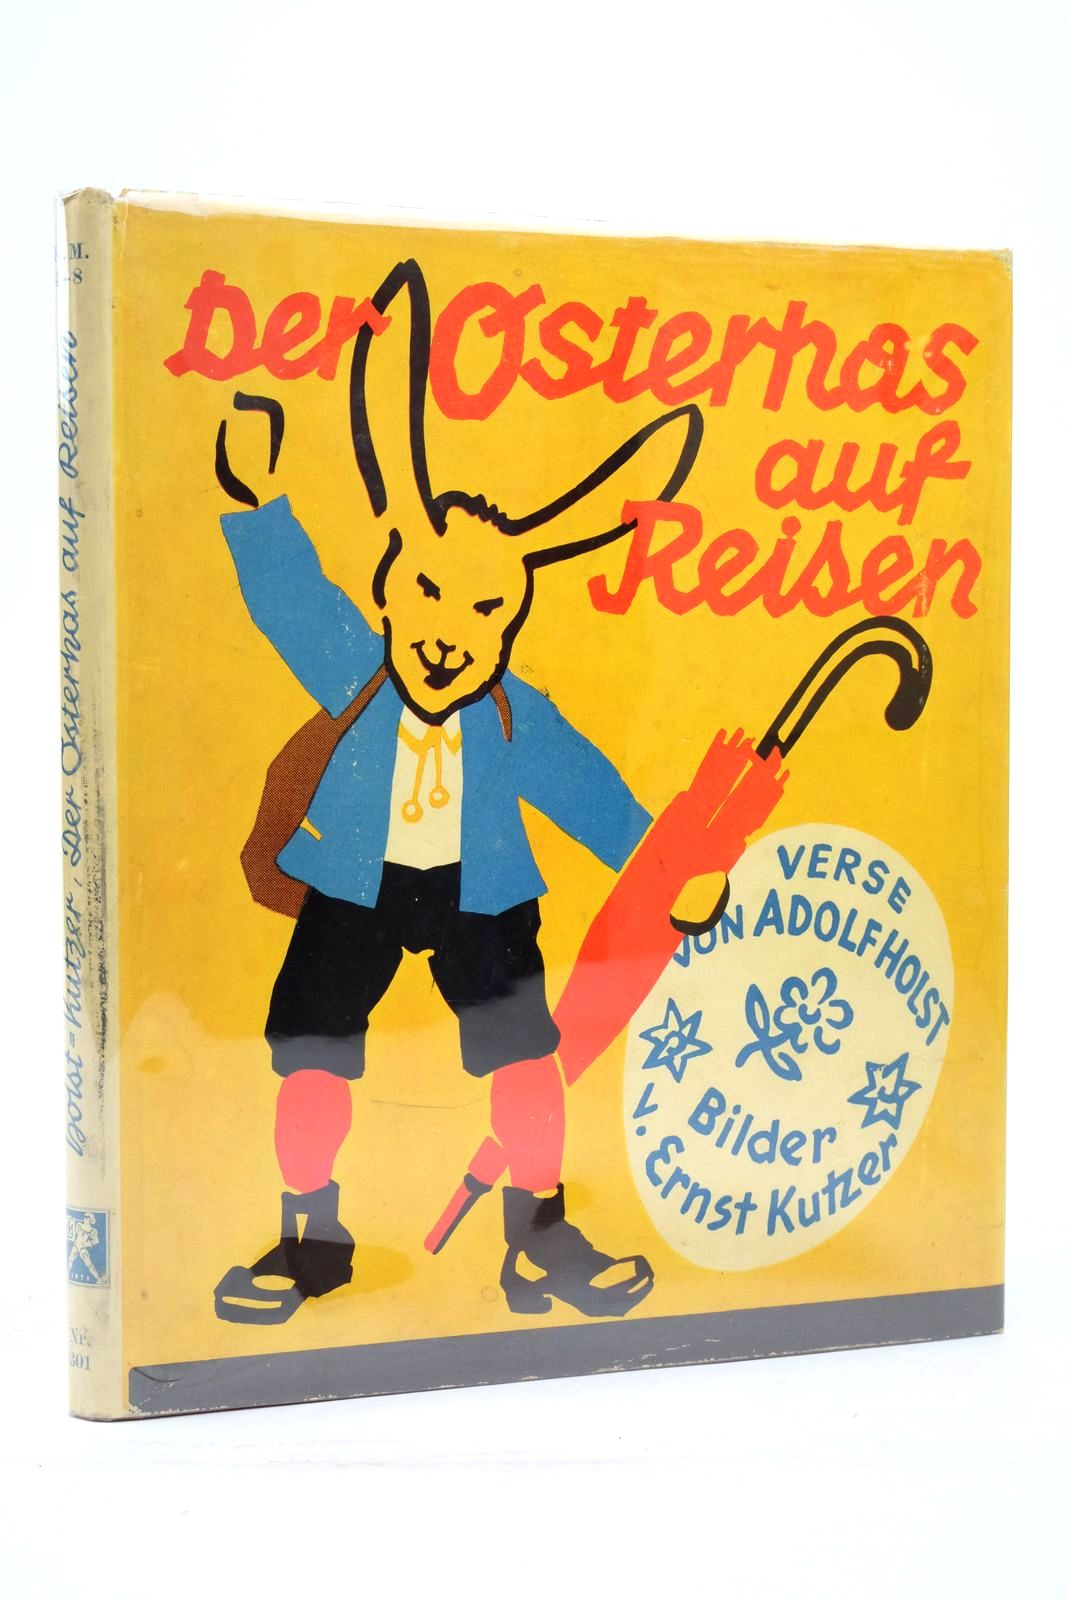 Photo of DER OSTERHAS AUF REISEN written by Holst, Adolf illustrated by Kutzer, Ernst published by R. &amp; E. Lenk (STOCK CODE: 2137767)  for sale by Stella & Rose's Books